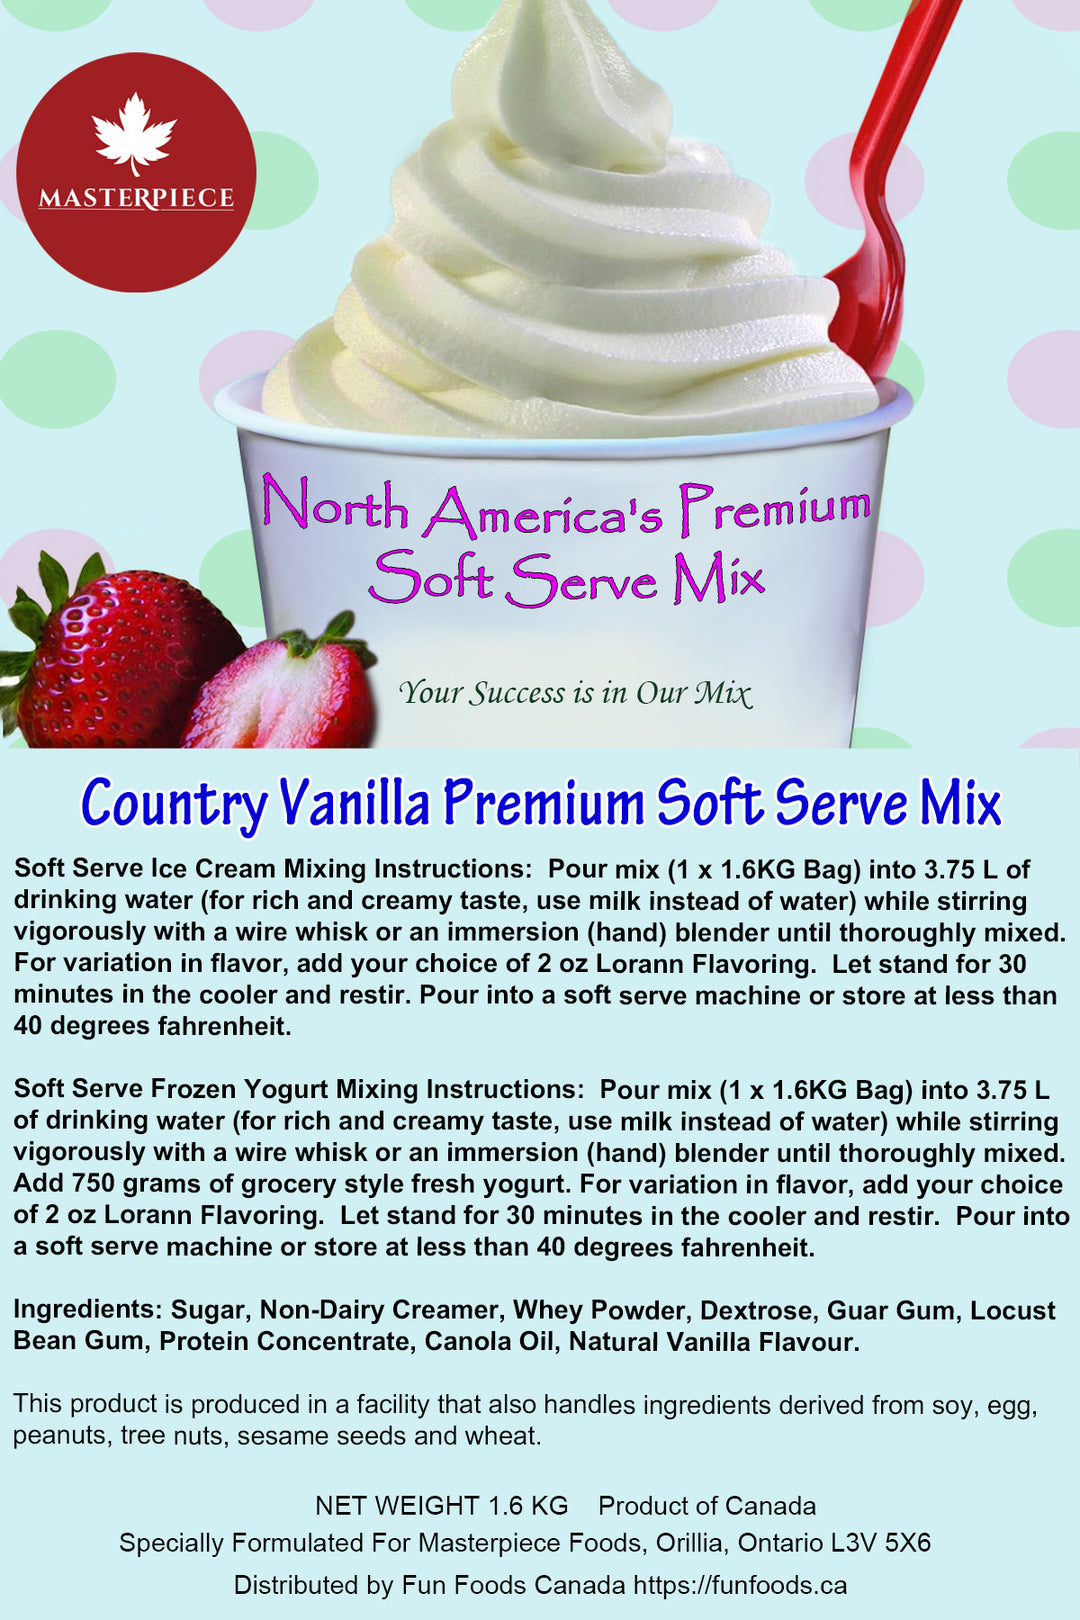 Country Vanilla Premium 3-in-1 Soft Serve Mix - 3.5 Lbs Bag - Case (12 x 3.5lb Bags) - Made in Canada